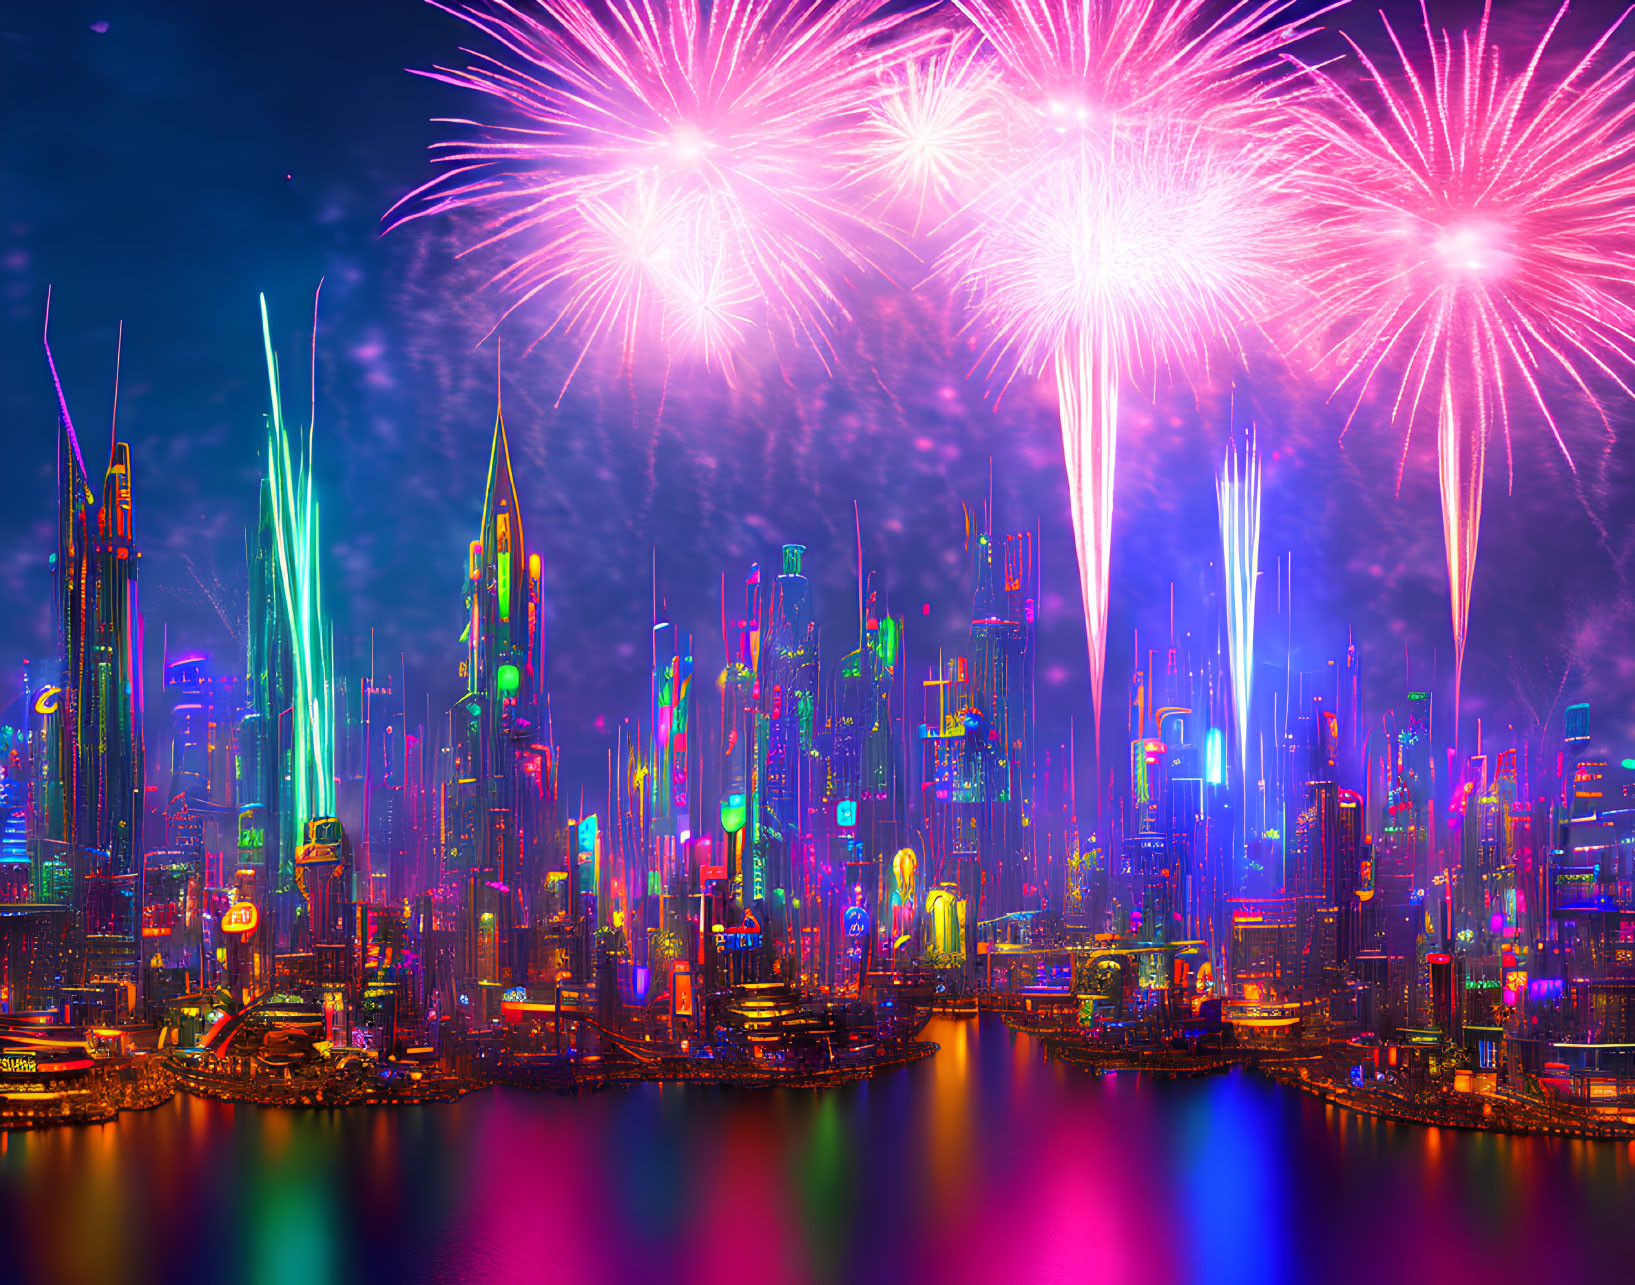 Futuristic cityscape at night with neon-lit skyscrapers and fireworks display